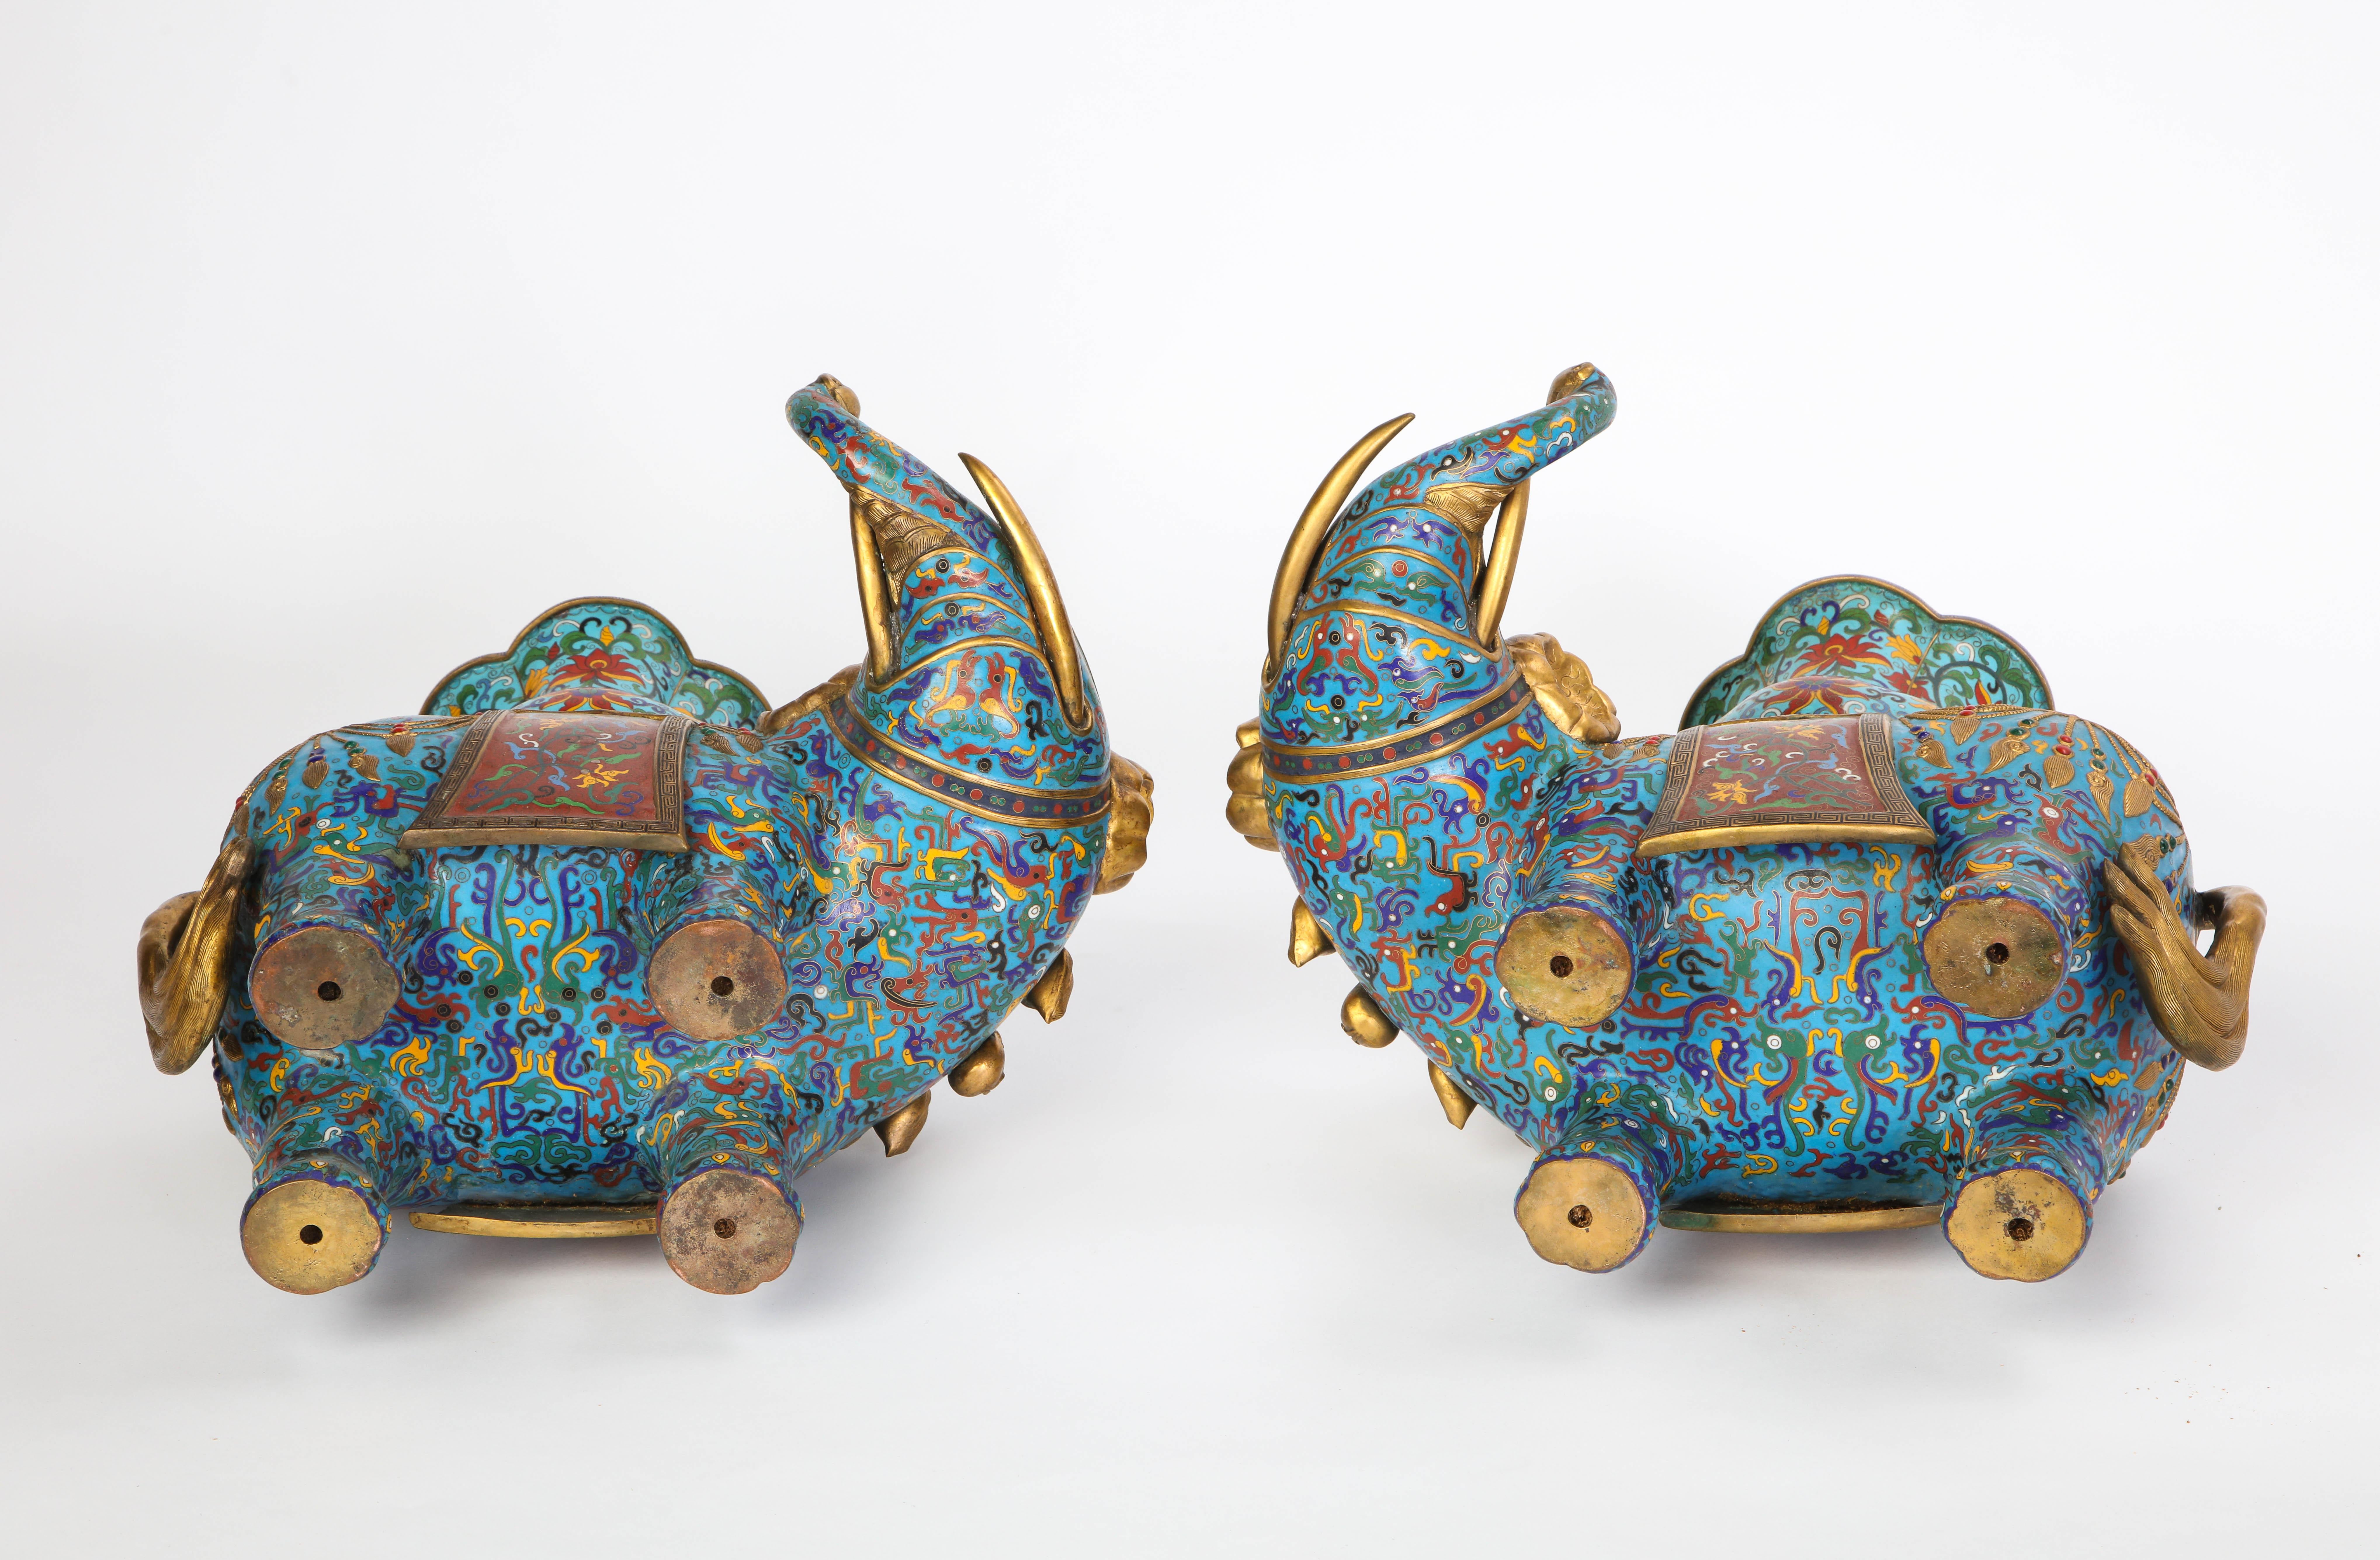 Pair of Chinese Cloisonne Enamel Elephant-Form Pricket Sticks, 20th Century For Sale 17